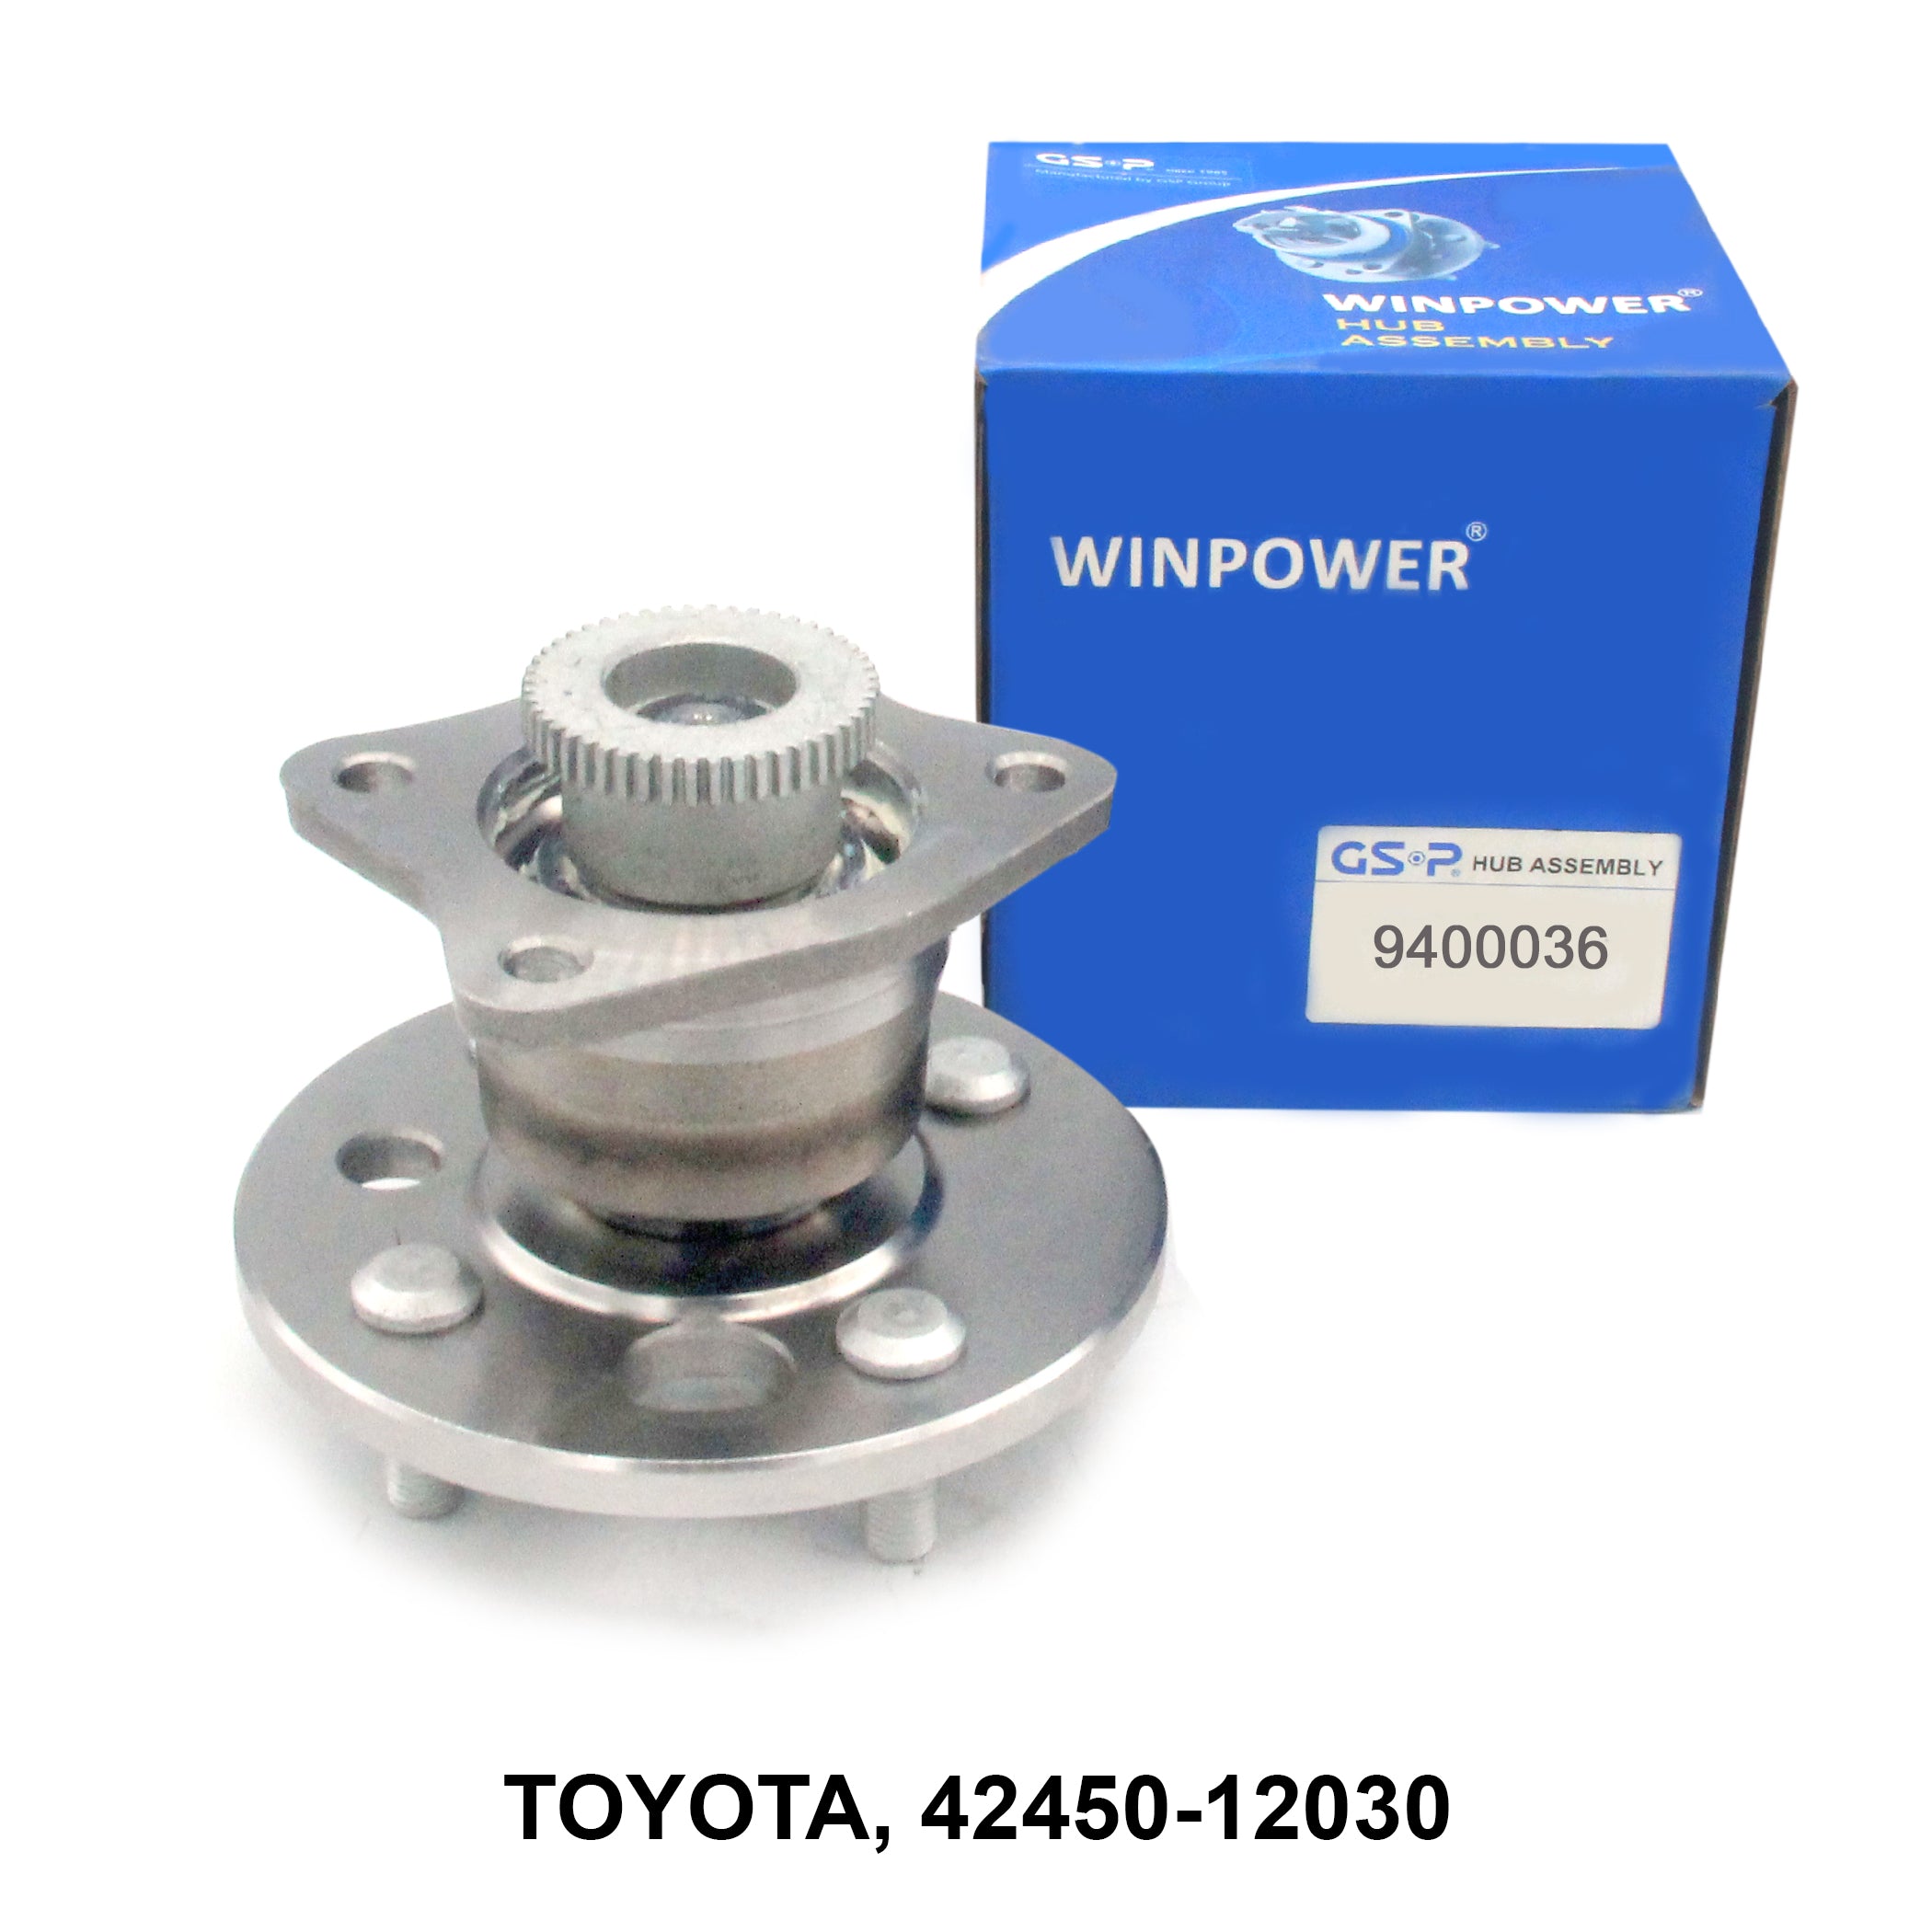 Hub Assembly, GSP+WINPOWER, 42450-12030, 9400036 (005193)